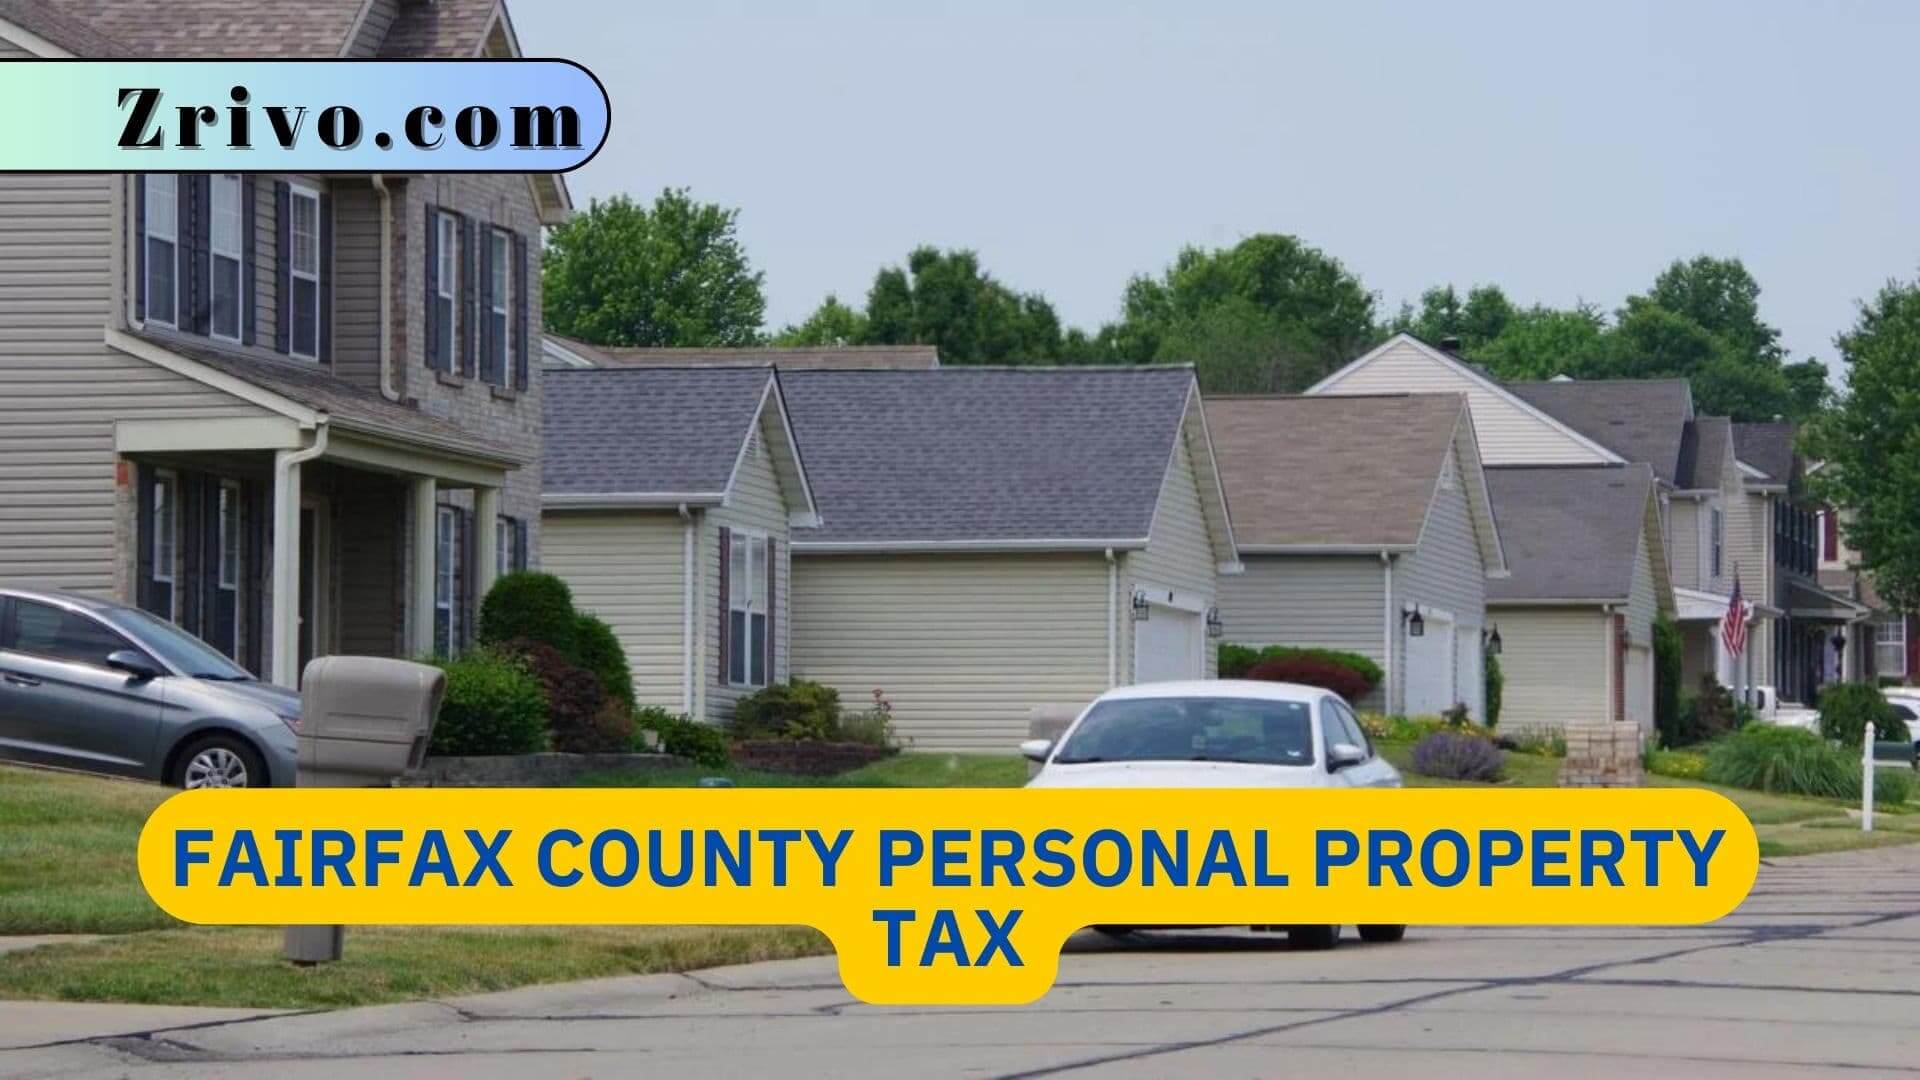 Fairfax County Personal Property Tax